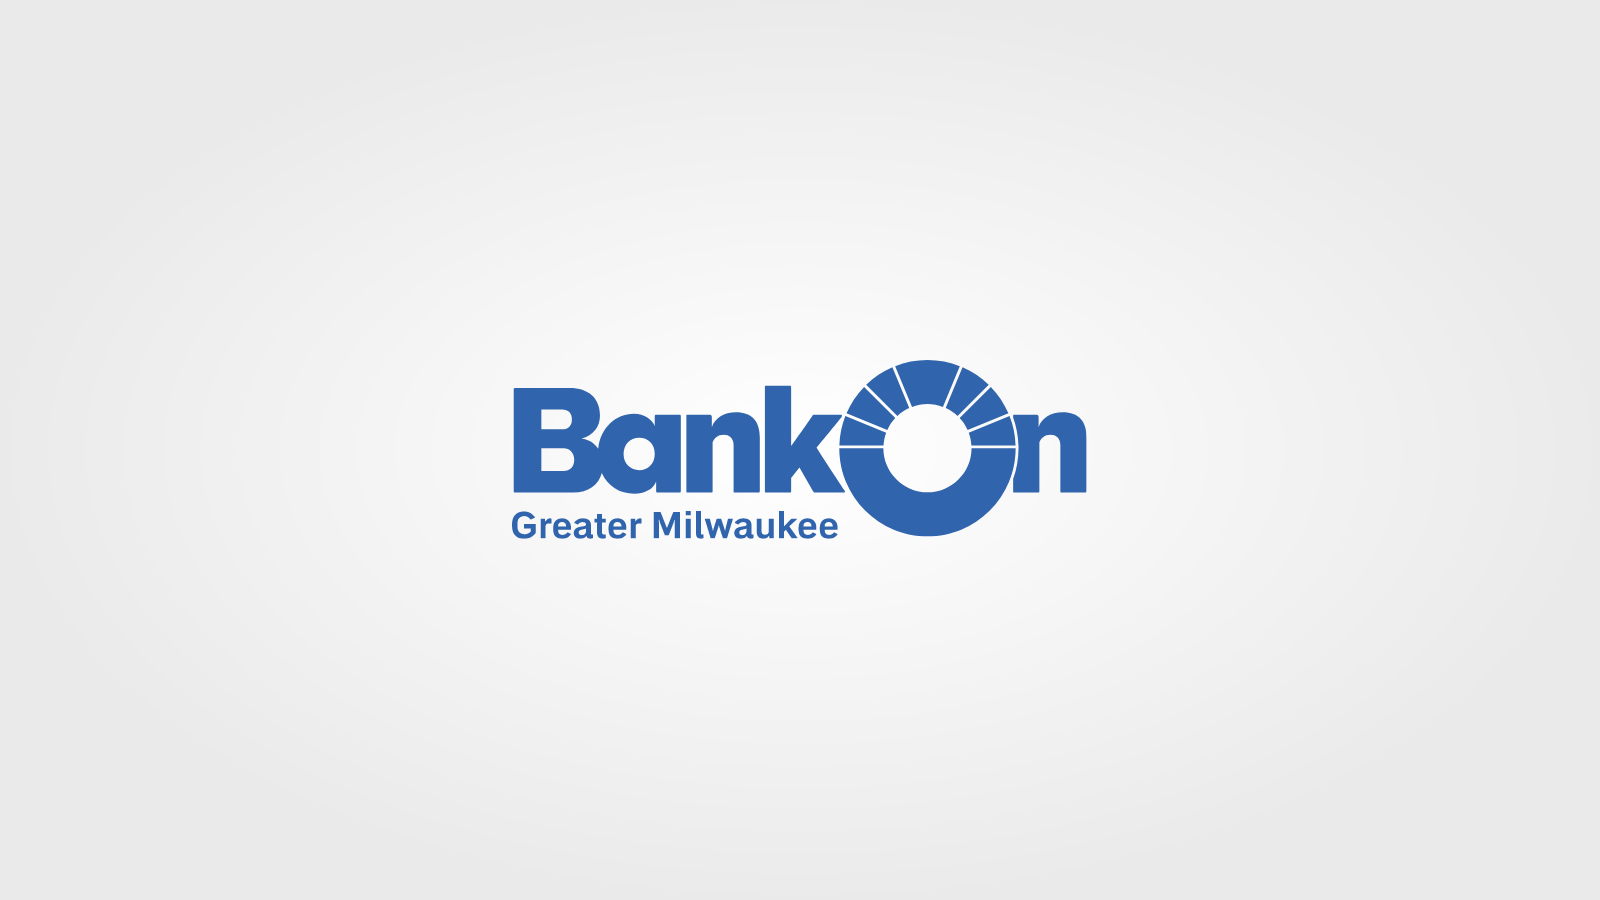 Bank On Greater Milwaukee on “That’s So Money”